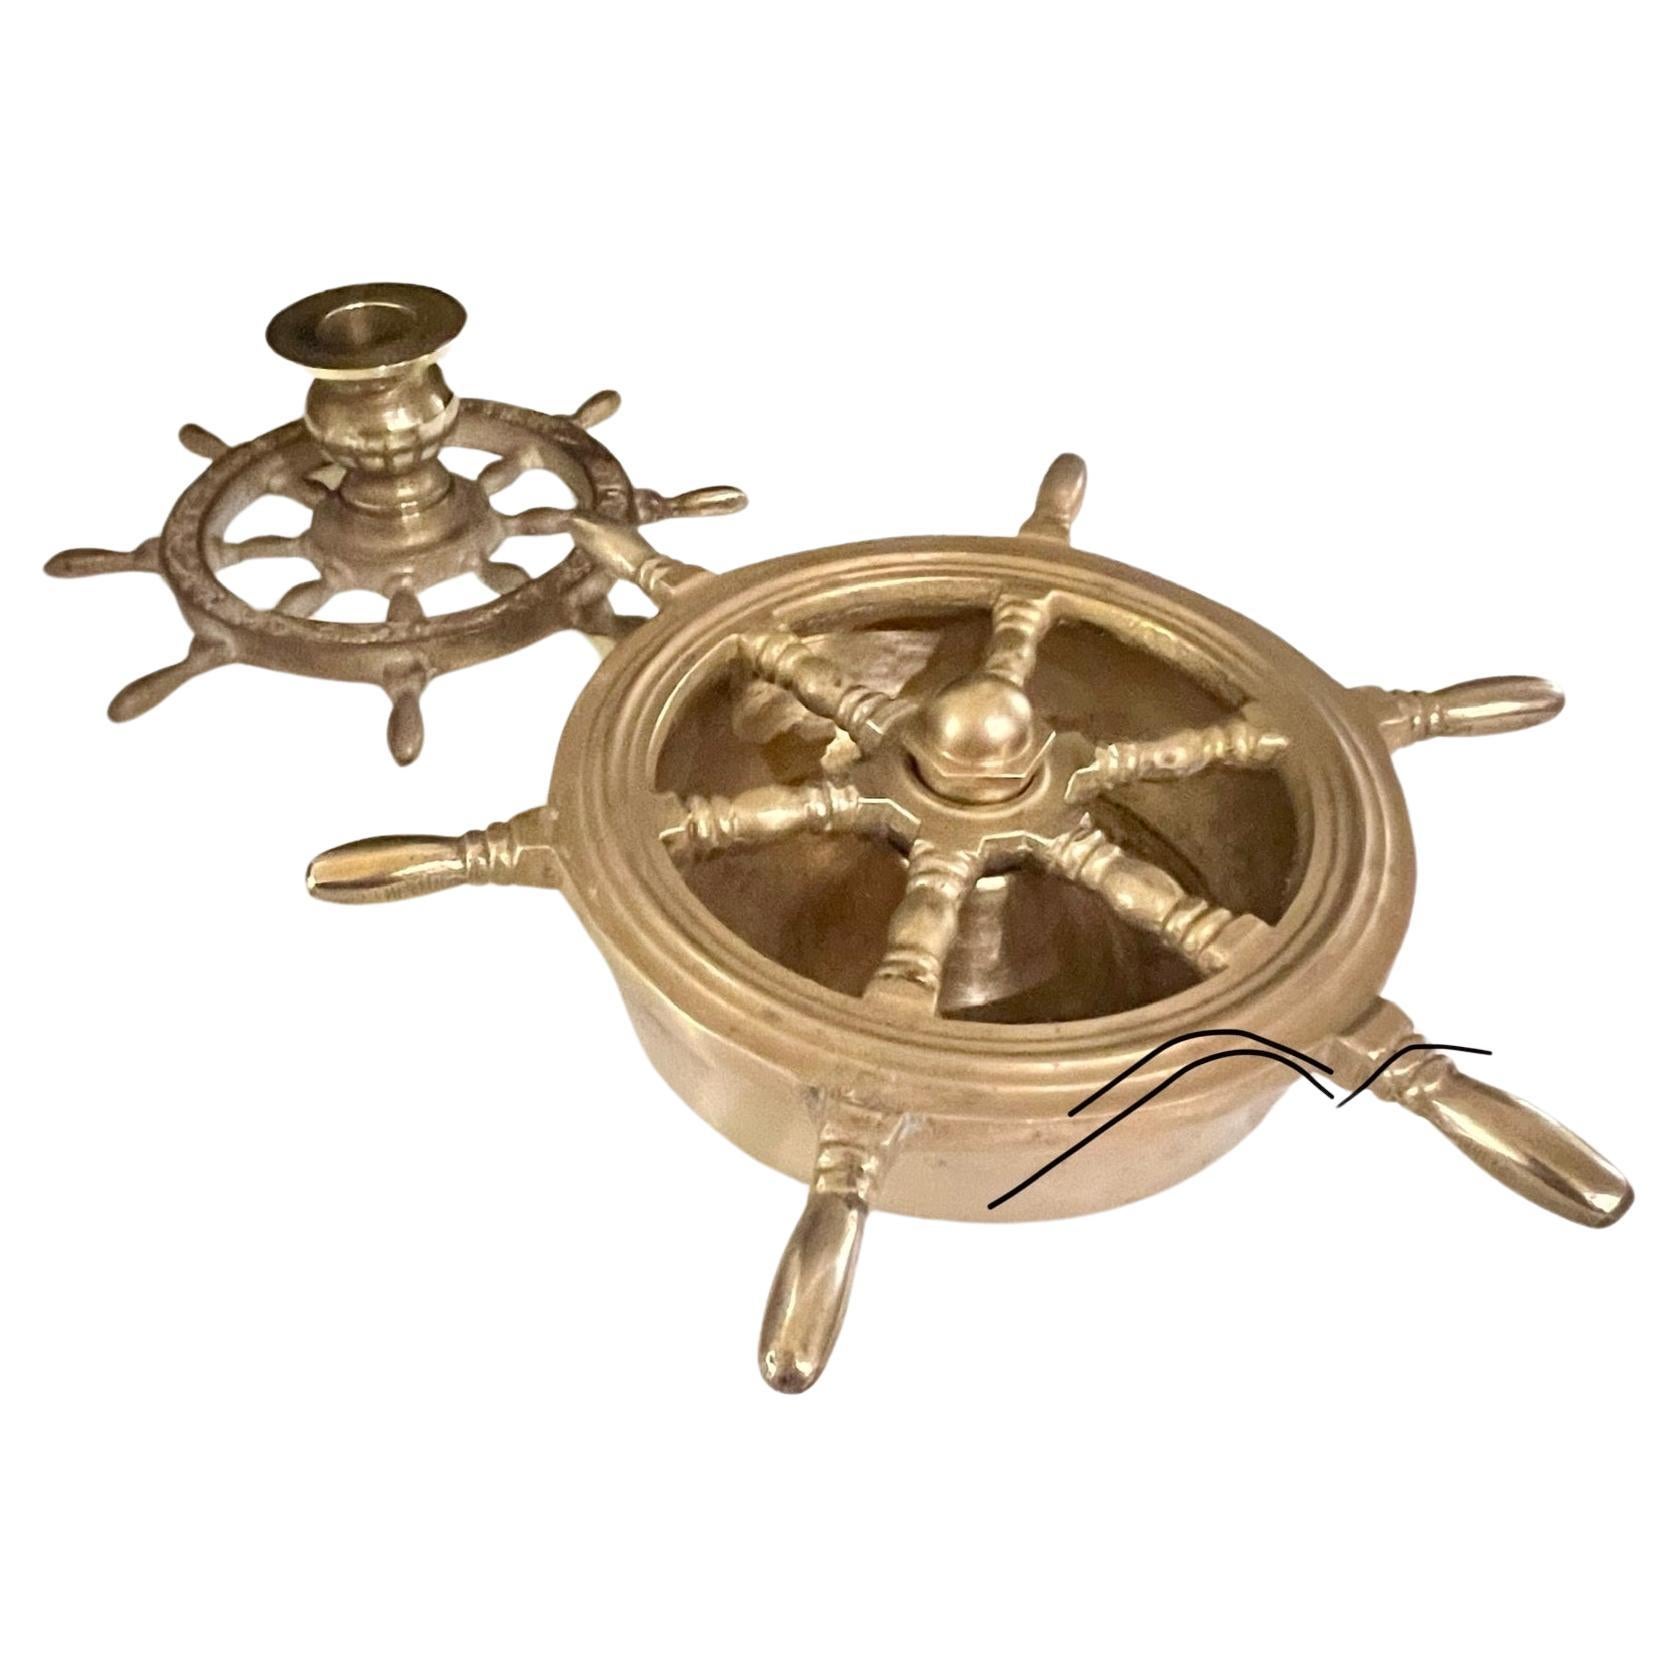 Whimsical Solid Brass Nautical Candle Holder & Ashtray Steering Wheel For Sale